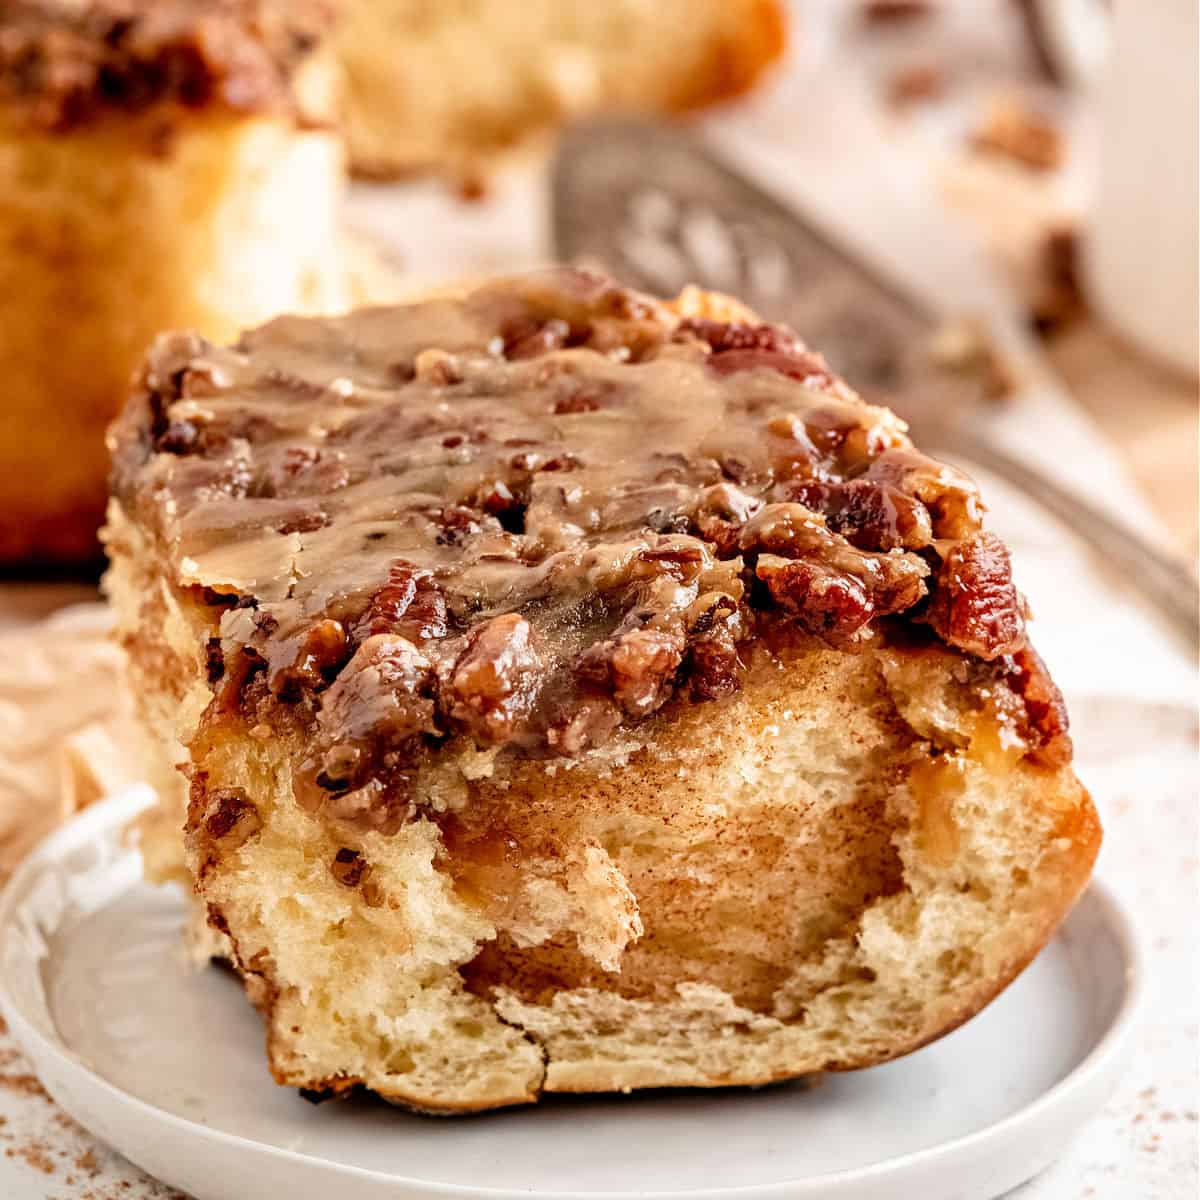 Learn how to make bakery quality Pecan Sticky Buns at home with this step-by-step guide. A fluffy yeast dough, cinnamon sugar filling and a gooey pecan topping make these sticky buns irresistible.